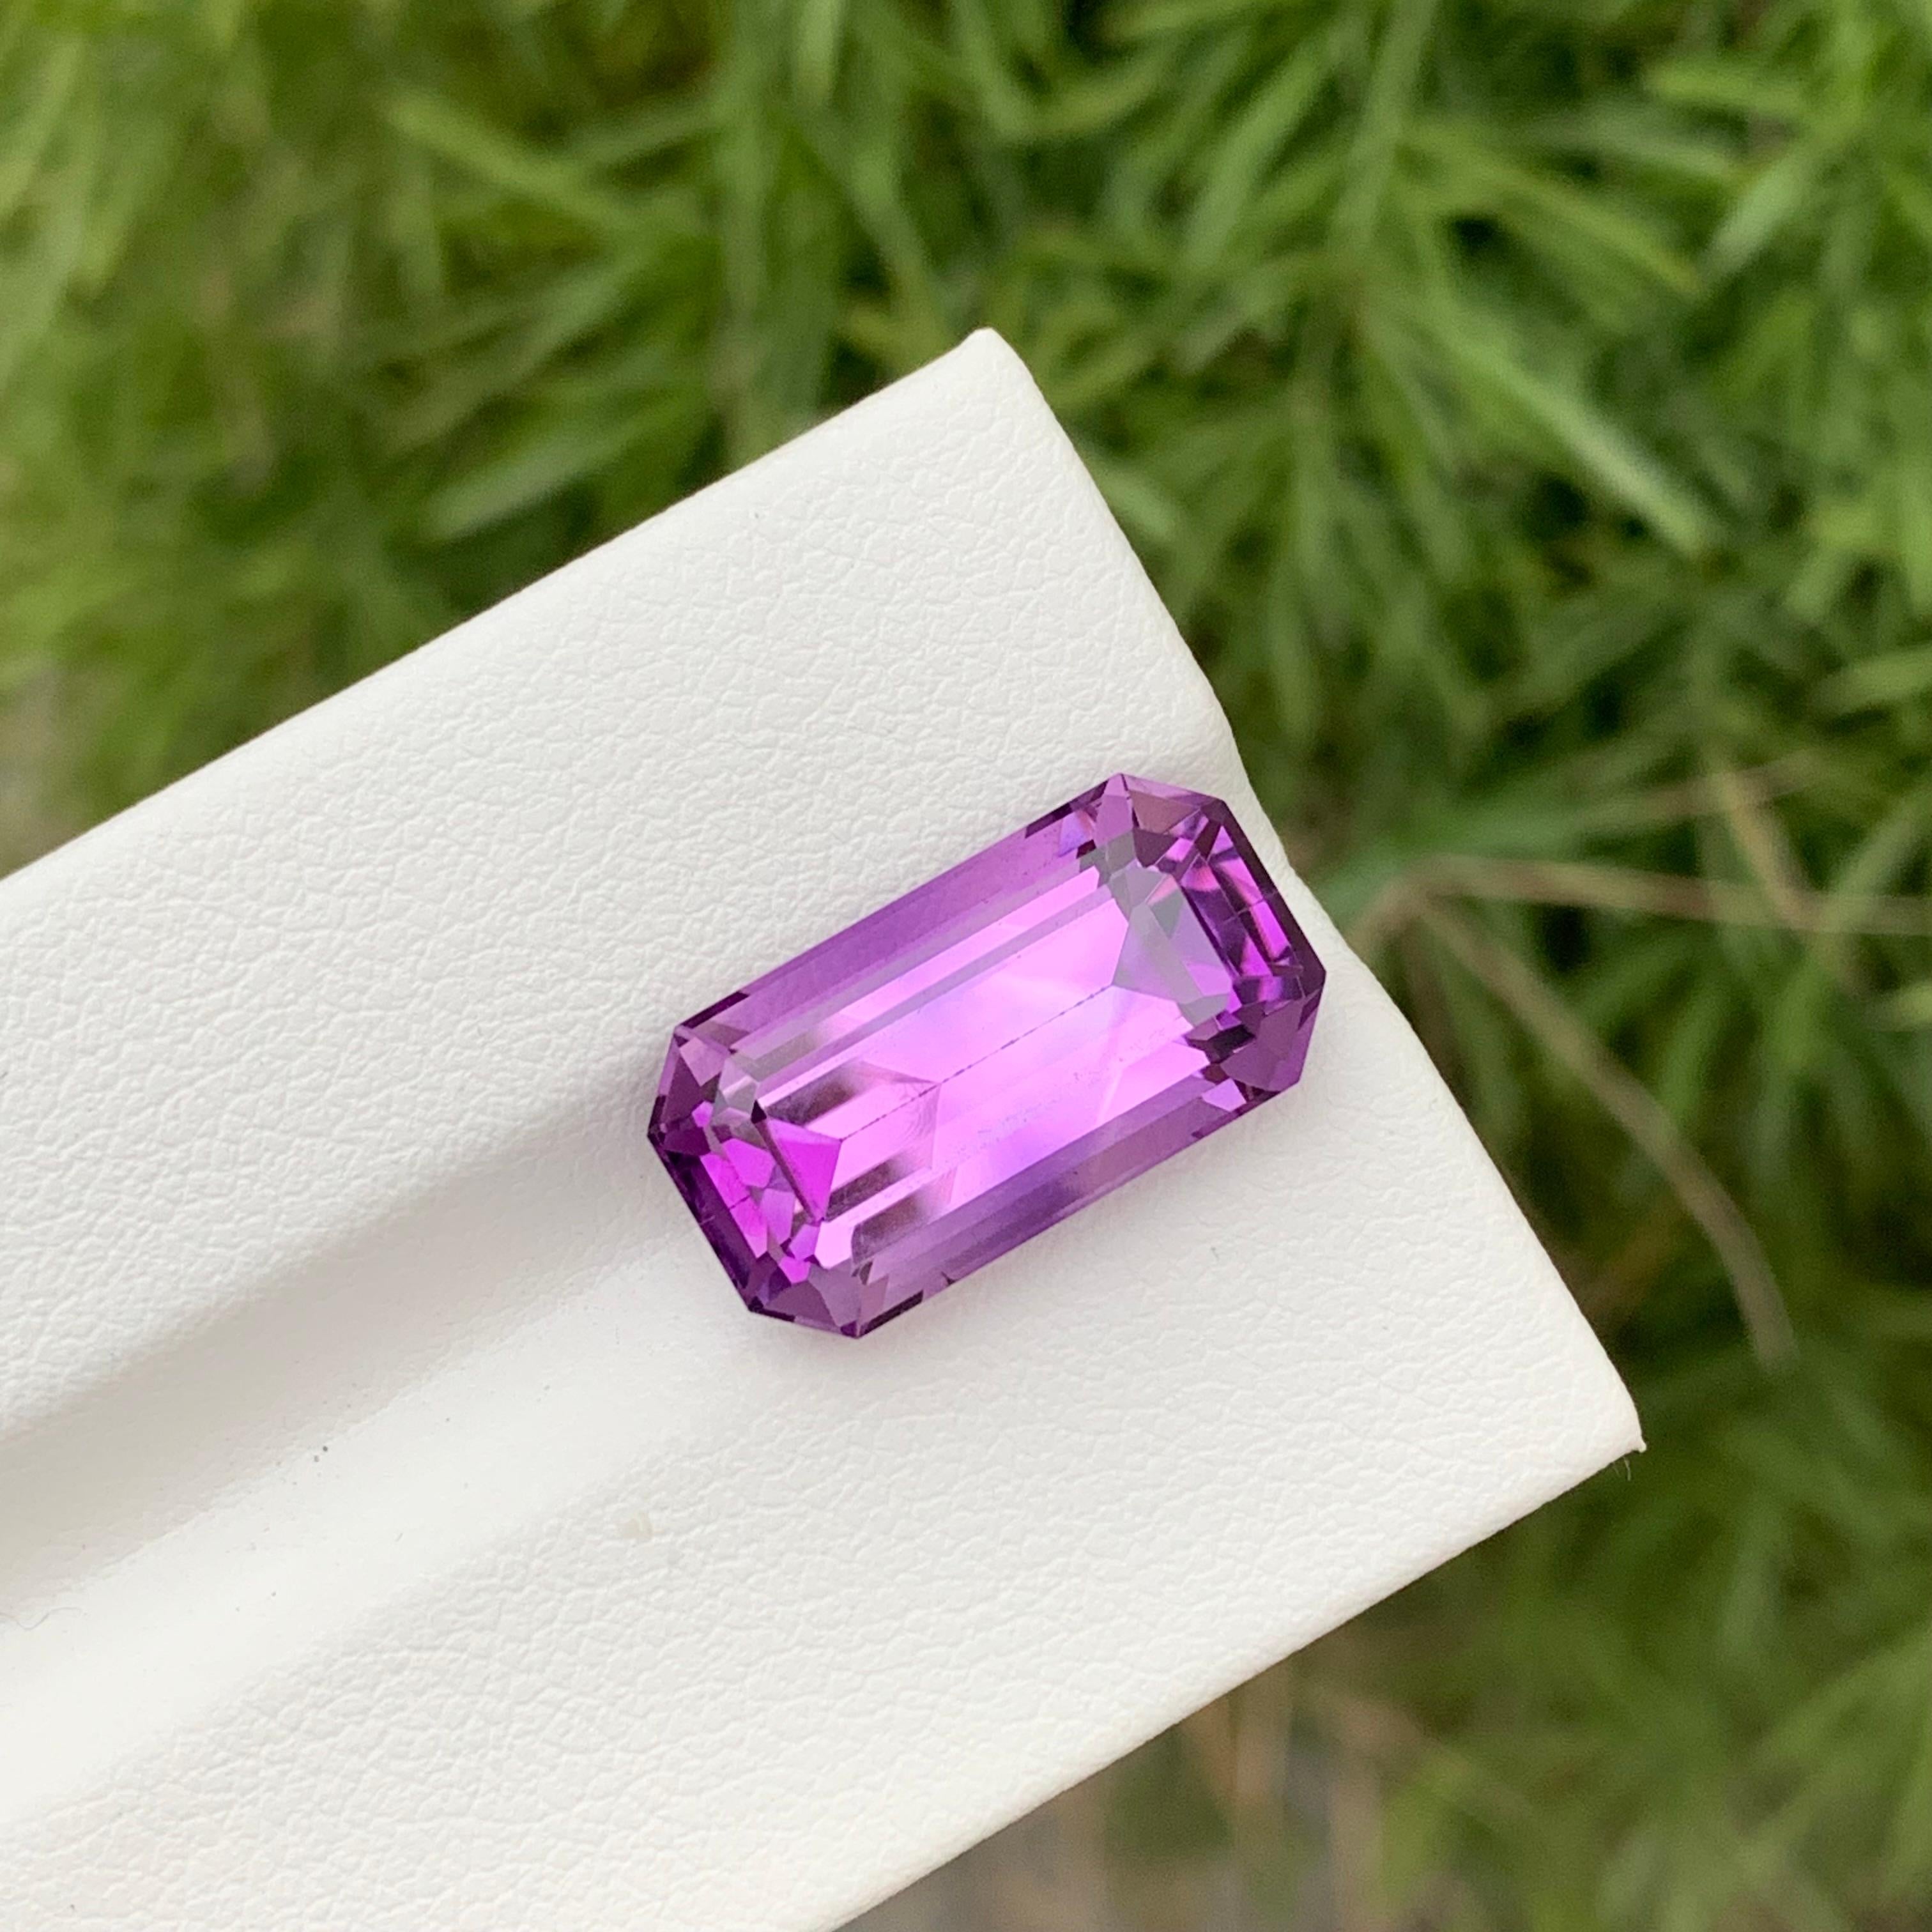 Loose Amethyst
Weight: 9.40 Carats
Dimension: 17.2 x 9.3 x 8.2 Mm
Colour: Purple
Origin: Brazil
Treatment: Non
Certificate: On Demand
Shape: Emerald


Amethyst, a stunning variety of quartz known for its mesmerizing purple hue, has captivated humans